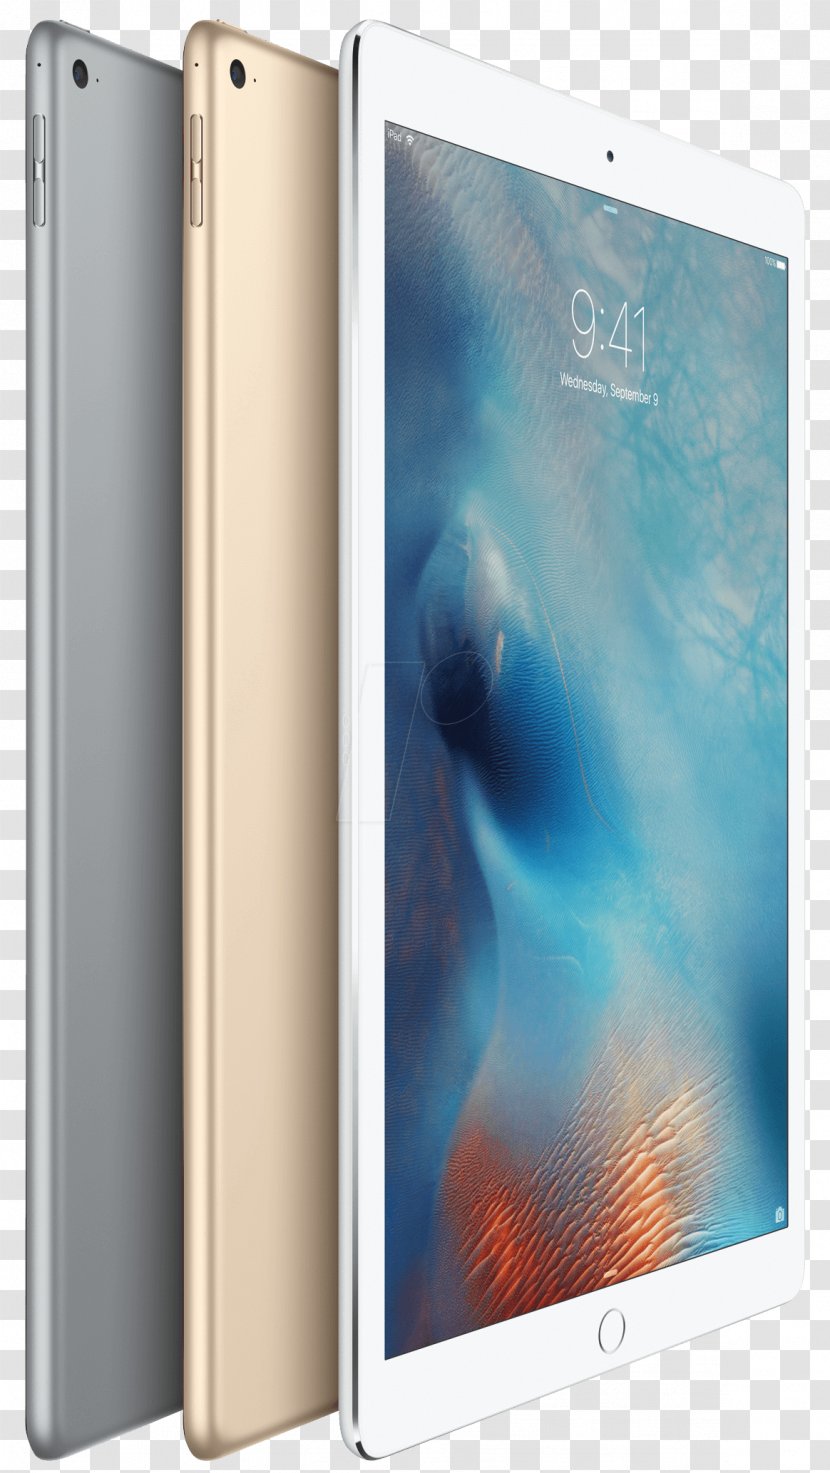 Apple IPad Pro (12.9) 3 (12.9-inch) (2nd Generation) (9.7) - Mobile Phones - Ipad Transparent PNG